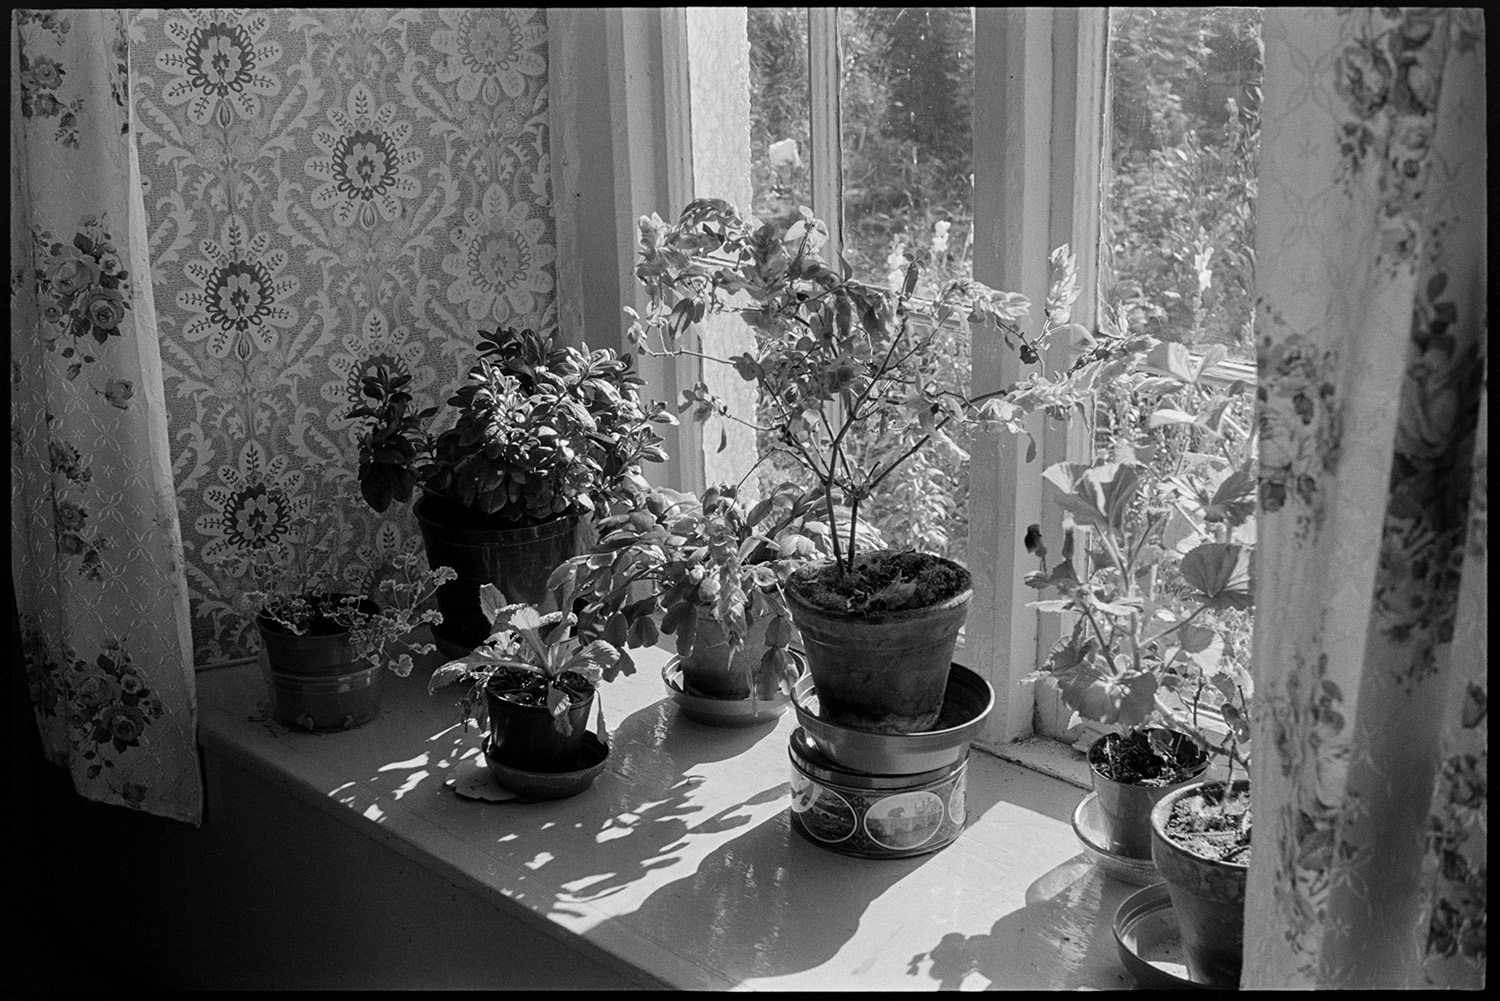 Cottage front window sill with potted plants, flower pots sunlit. 
[Pots plants in the window sill of a cottage in Mariansleigh. The walls are covered with patterned wallpaper and the curtains hung up by the window have a floral motif. One of the flower pots is raised up on a biscuit tin.]